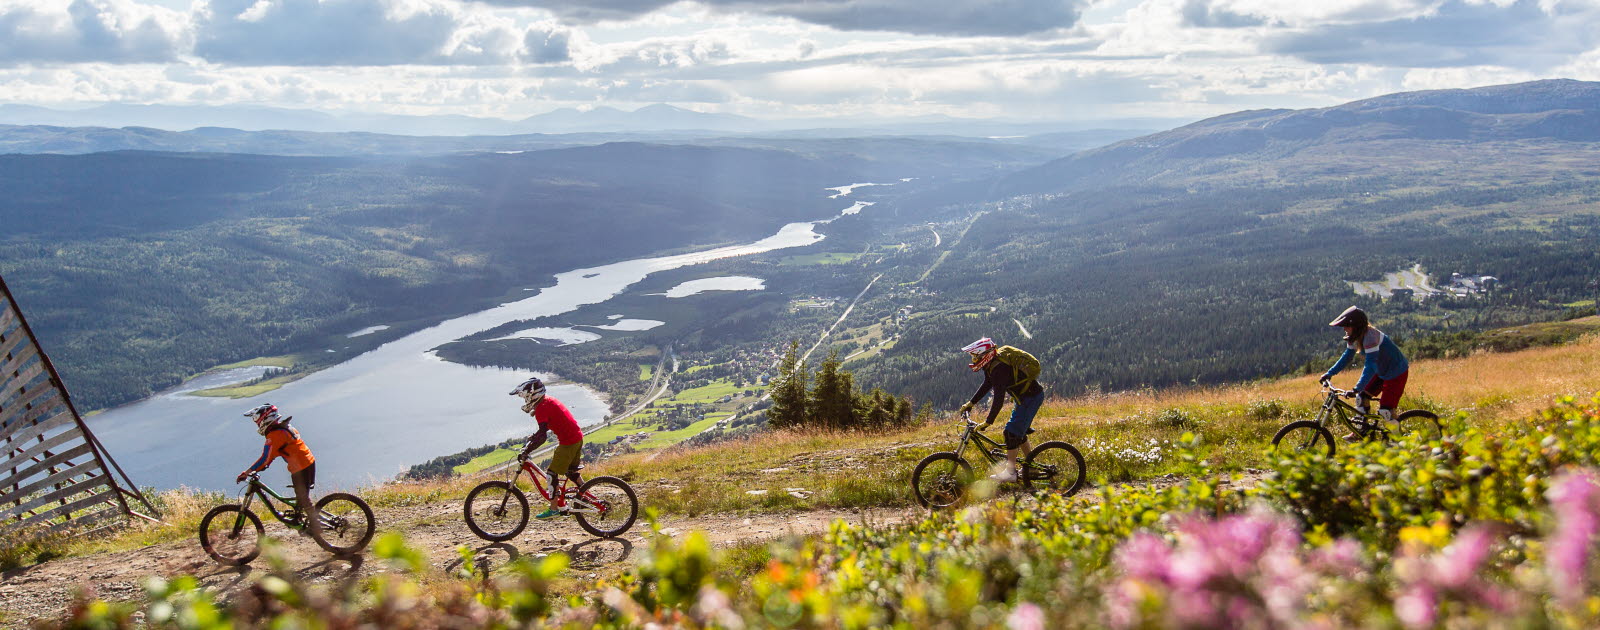 People on bikes at a mountain in Sweden